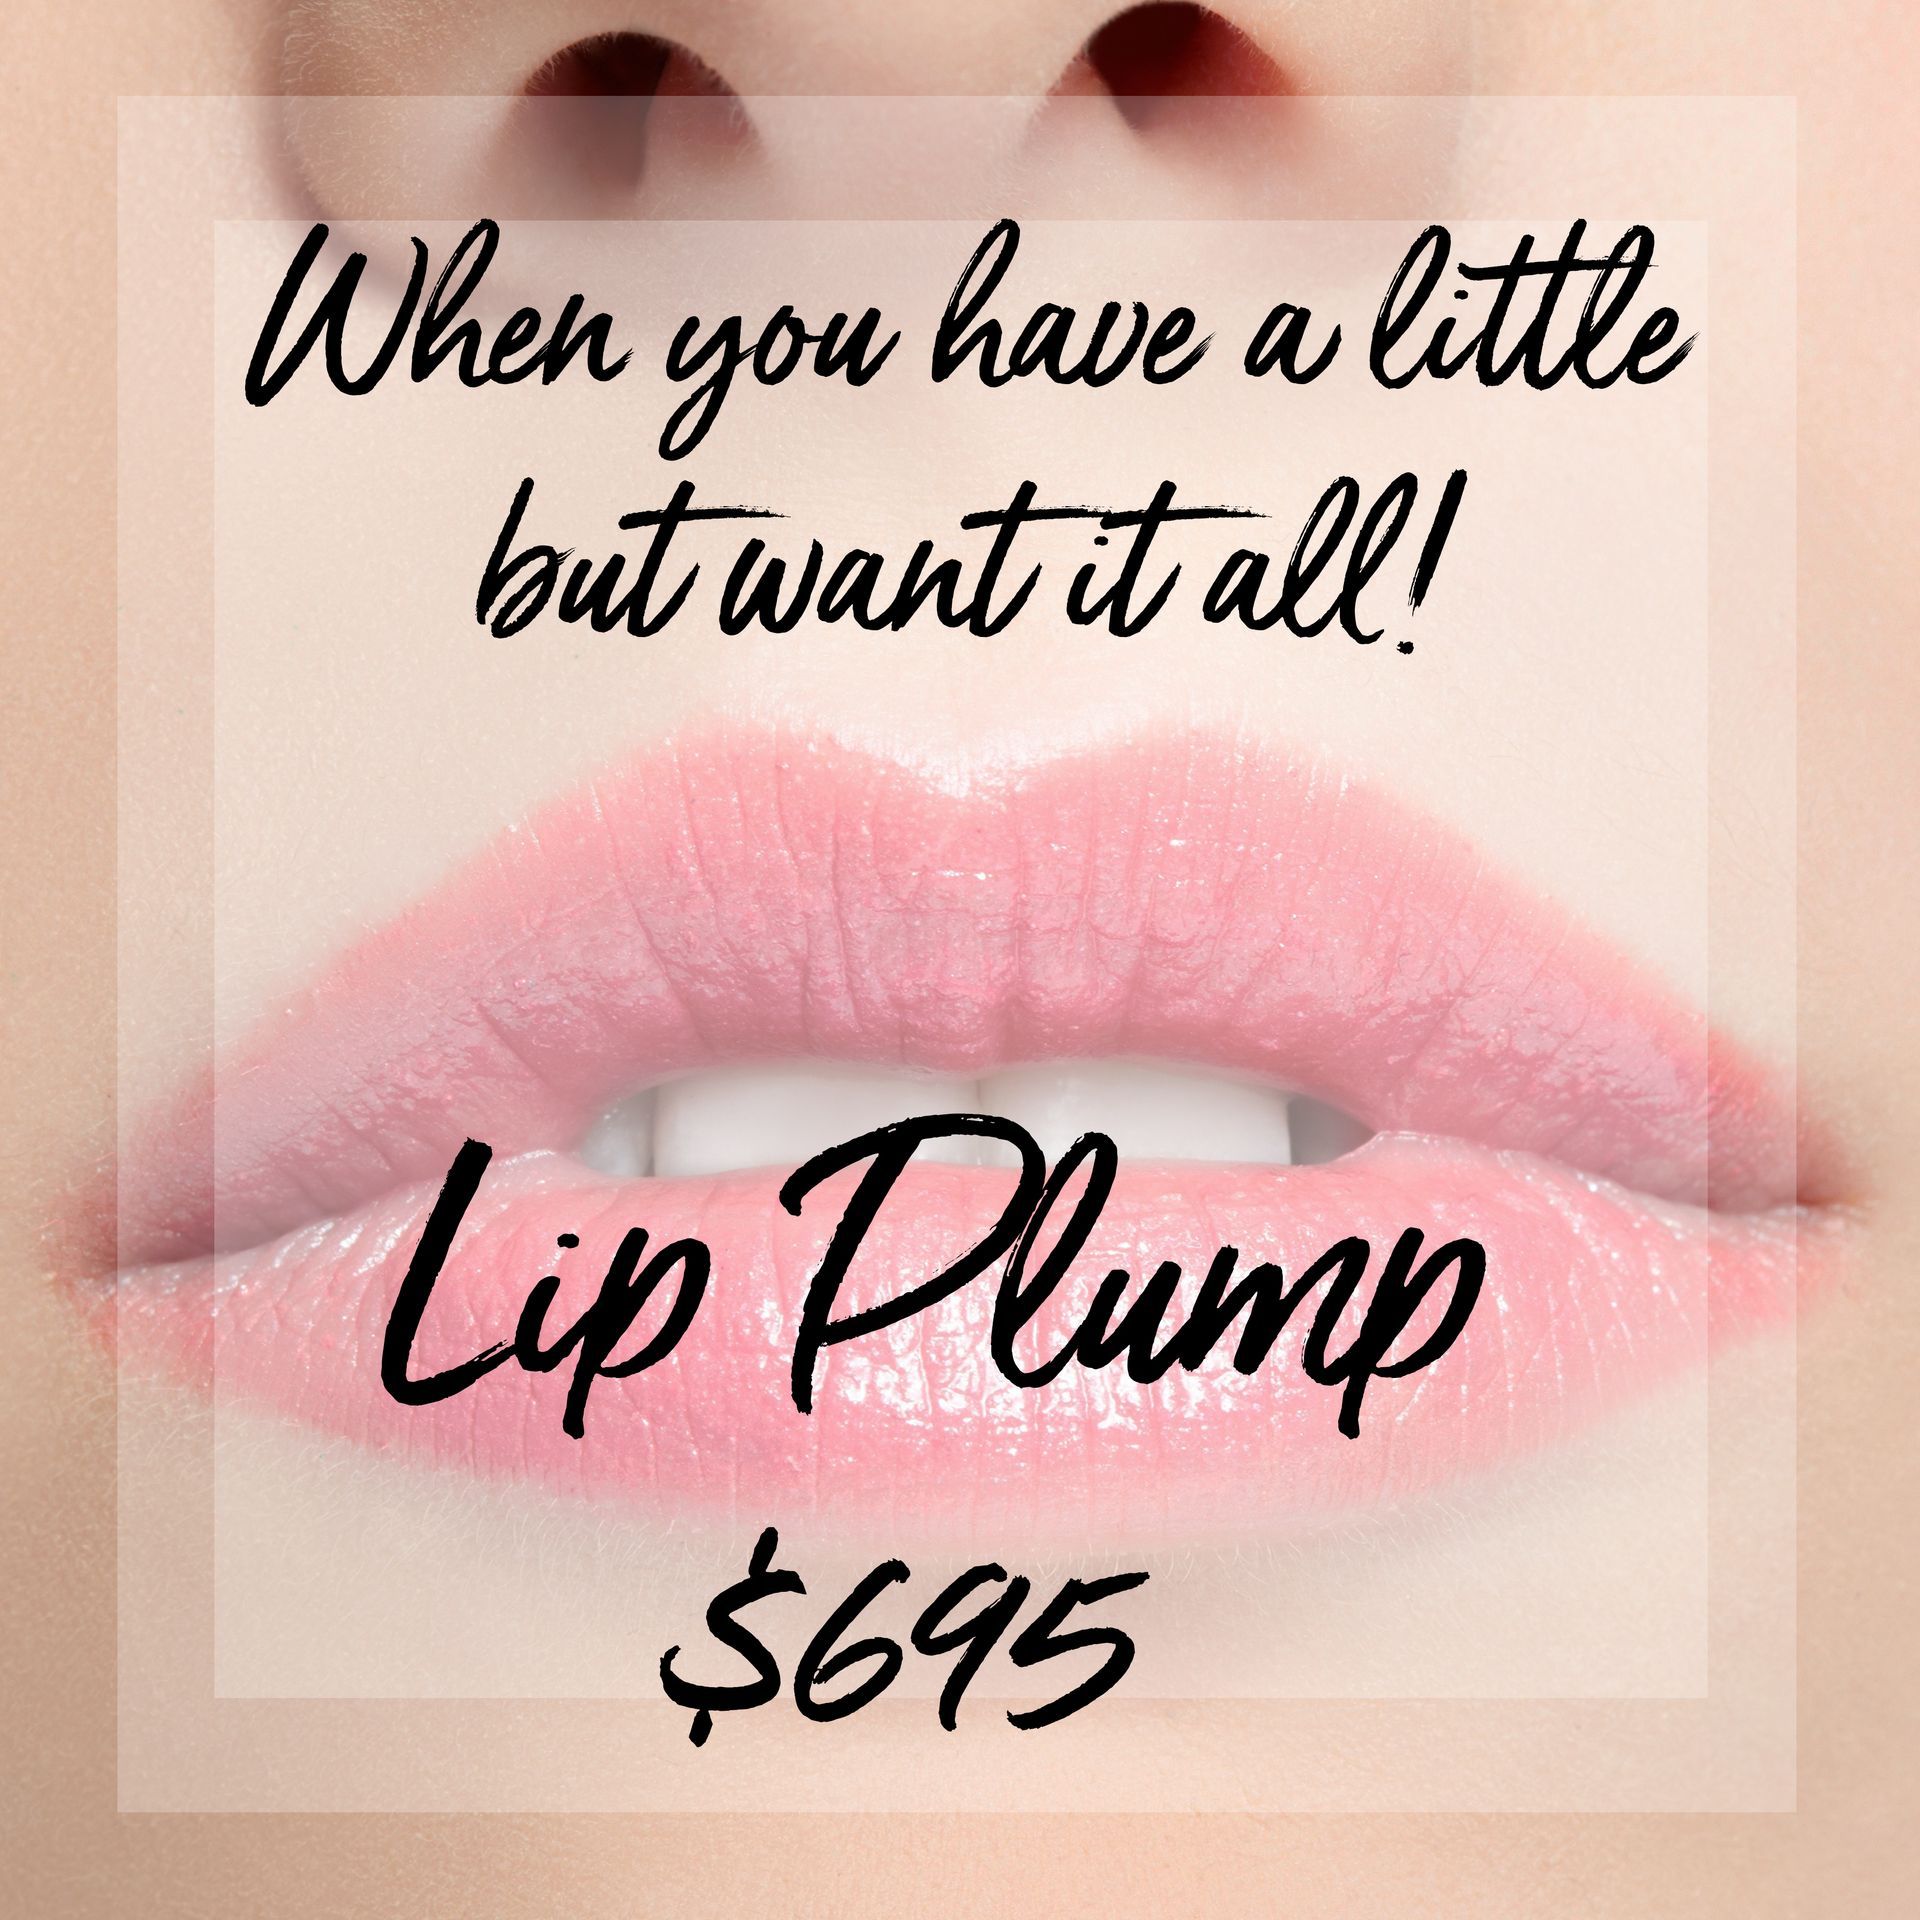 When you have a little but want it all lip plump $ 6.95